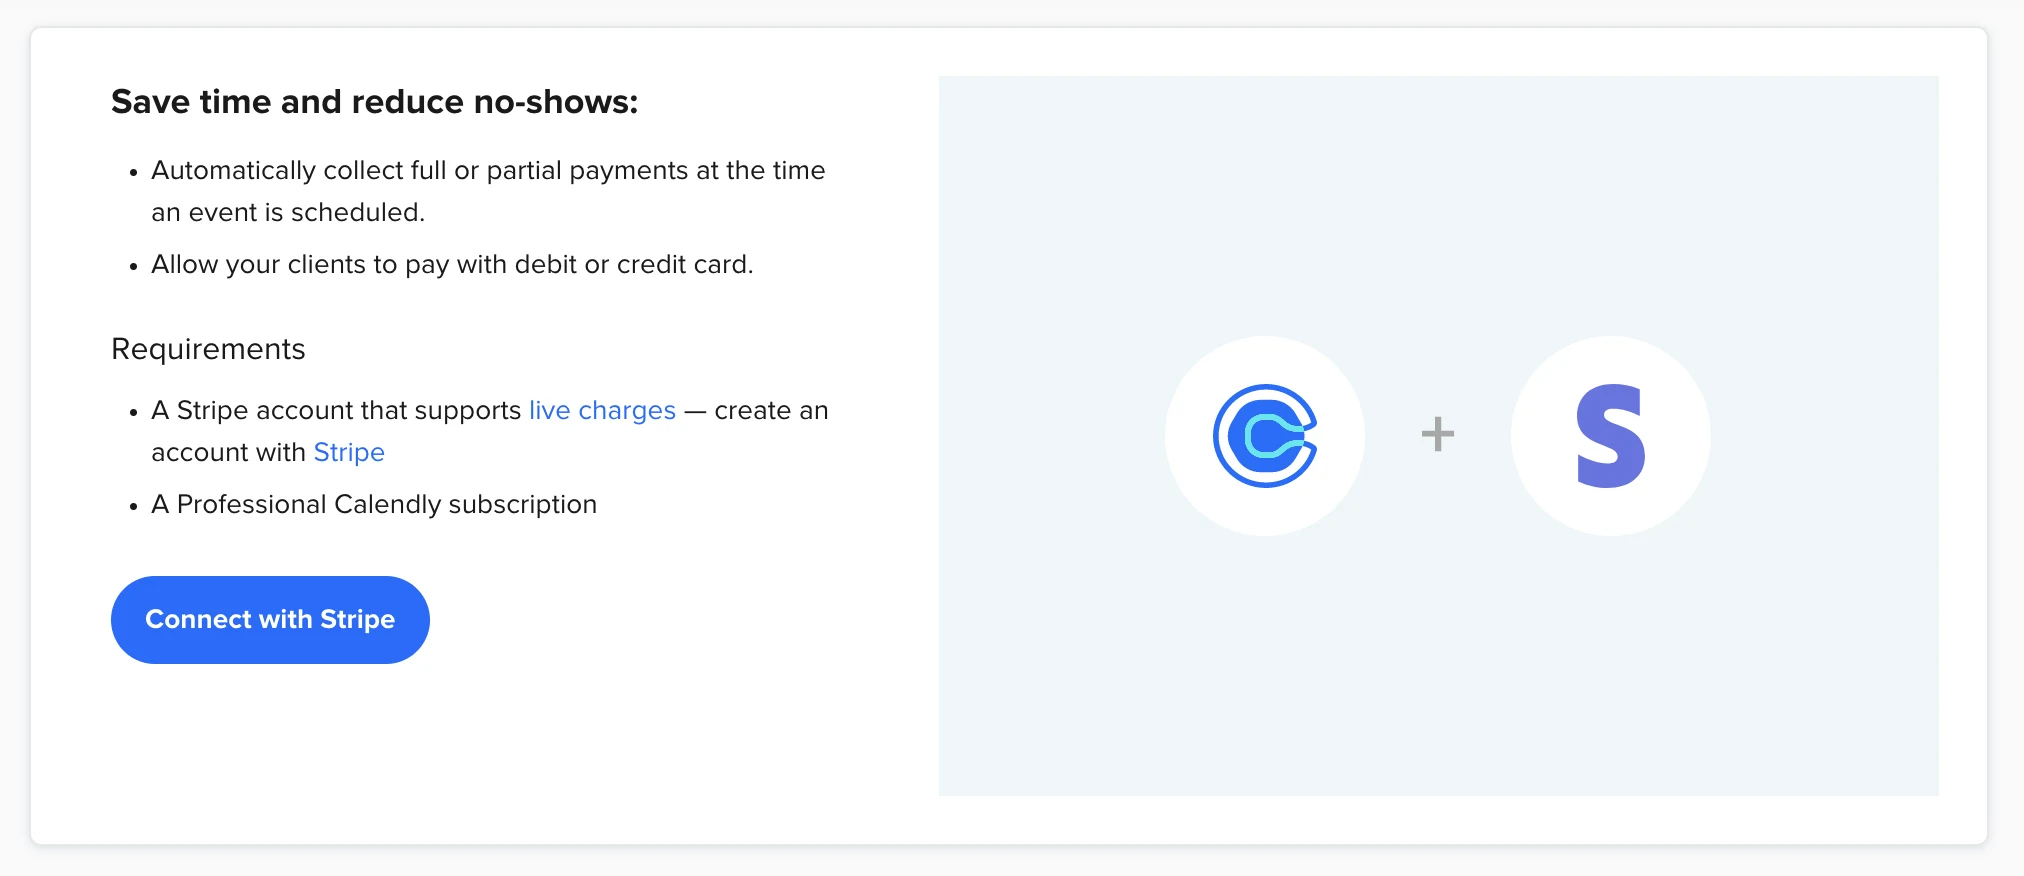 screenshot of integration page: Automatically collect full or partial payments at the time an event is scheduled. Allow your clients to pay with debit or credit card.